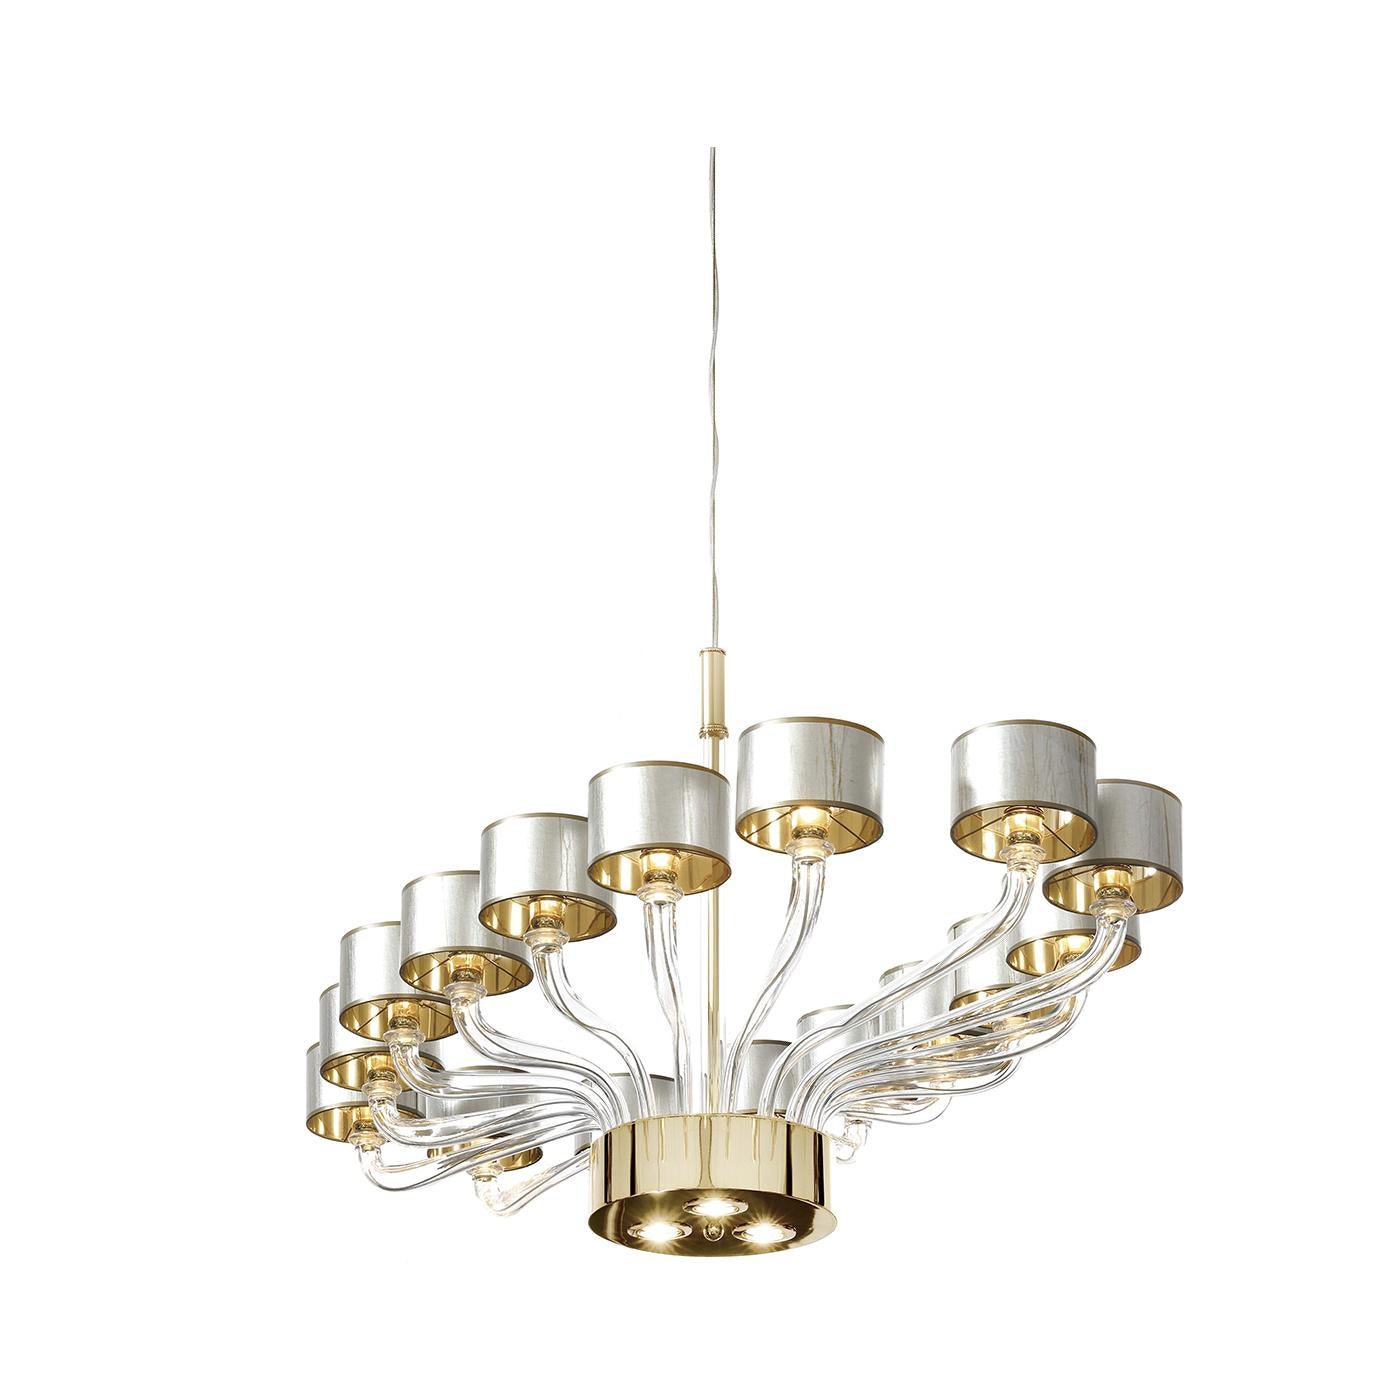 The chic, contemporary design of this magnificent chandelier combines traditional crafting techniques with a modern design approach. Simple and elegant lines create an oval silhouette enriched by the noble material used: authentic Venetian